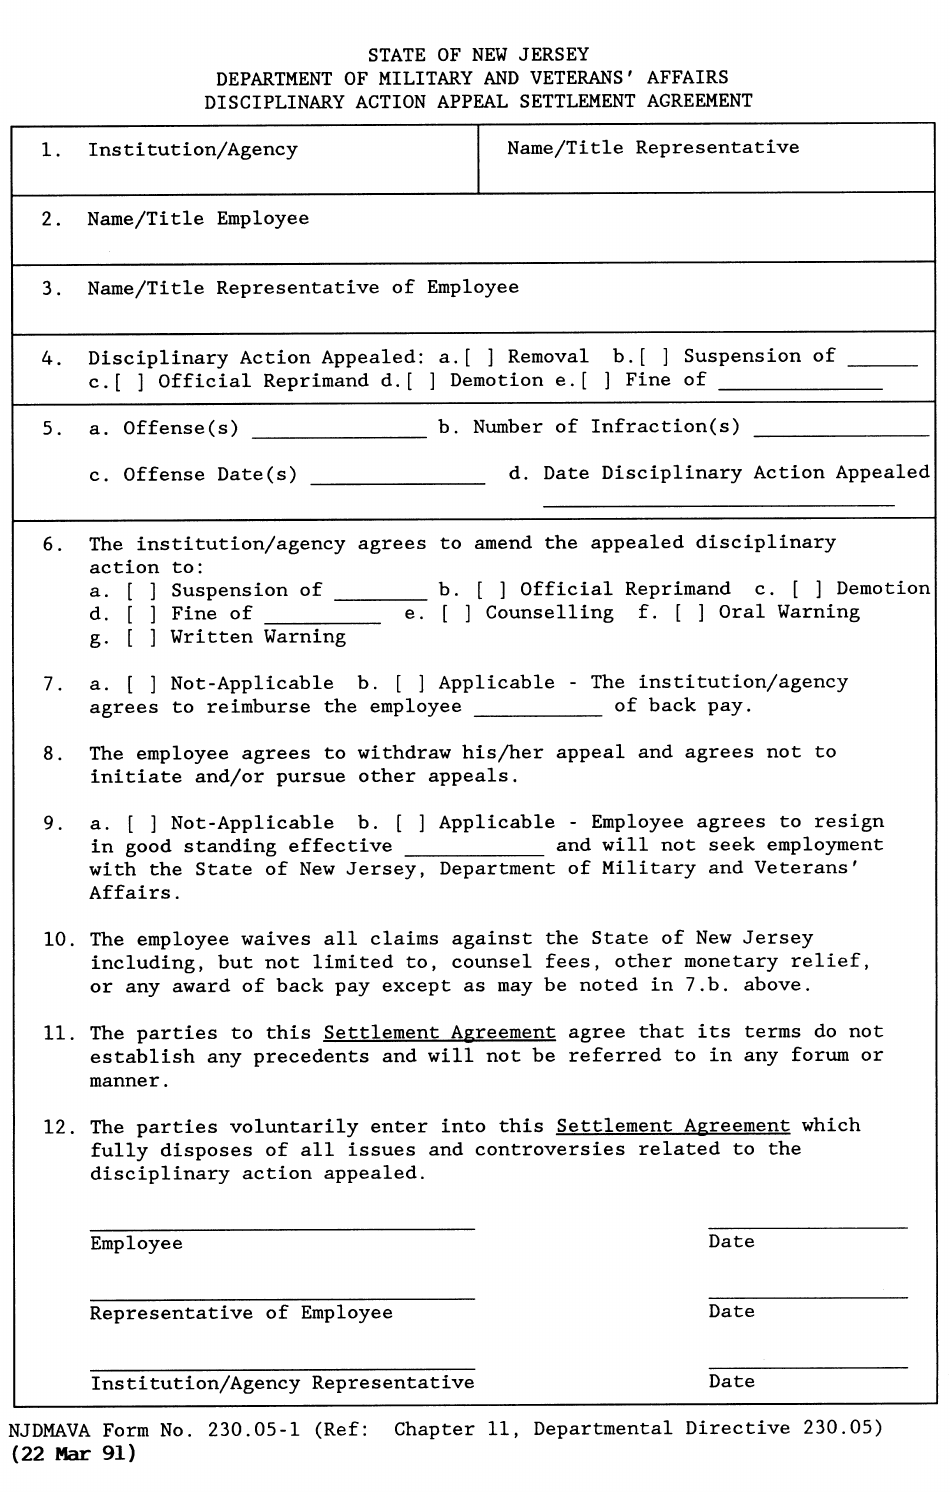 NJDMAVA Form 230.05-1 Disciplinary Action Appeal Settlement Agreement - New Jersey, Page 1